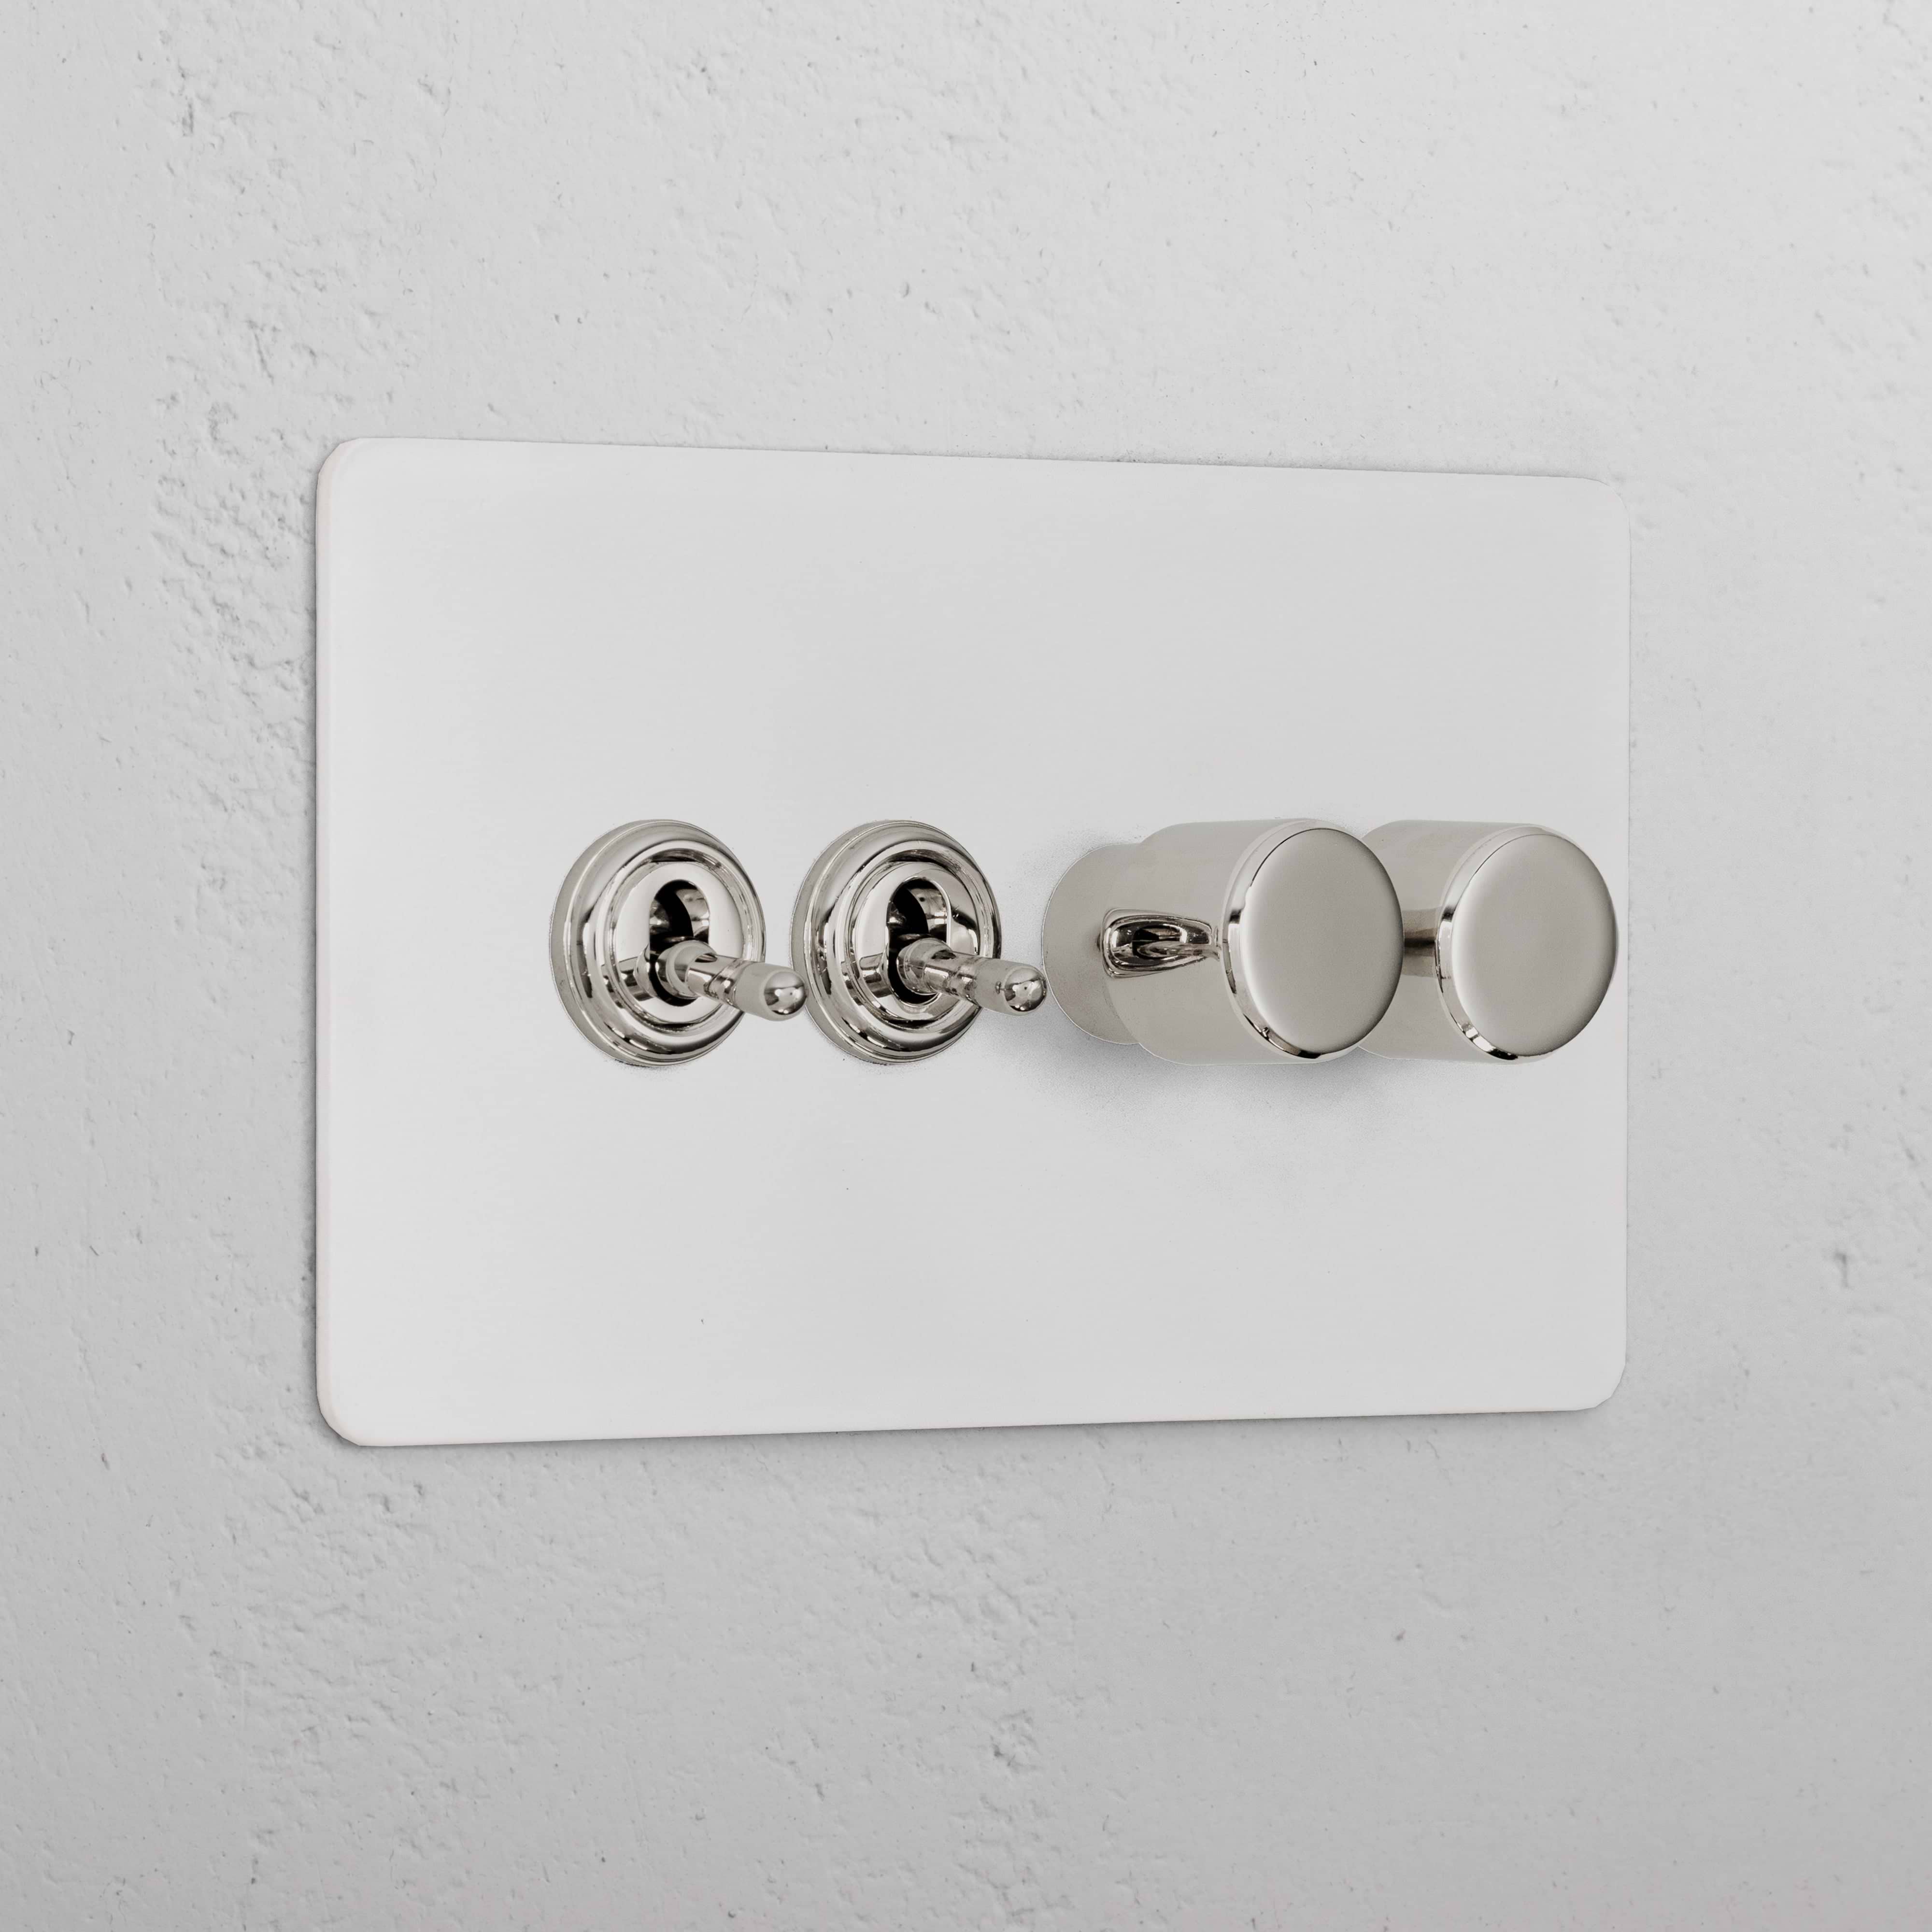 4G Mixed Switch 2T2D - Paintable Polished Nickel